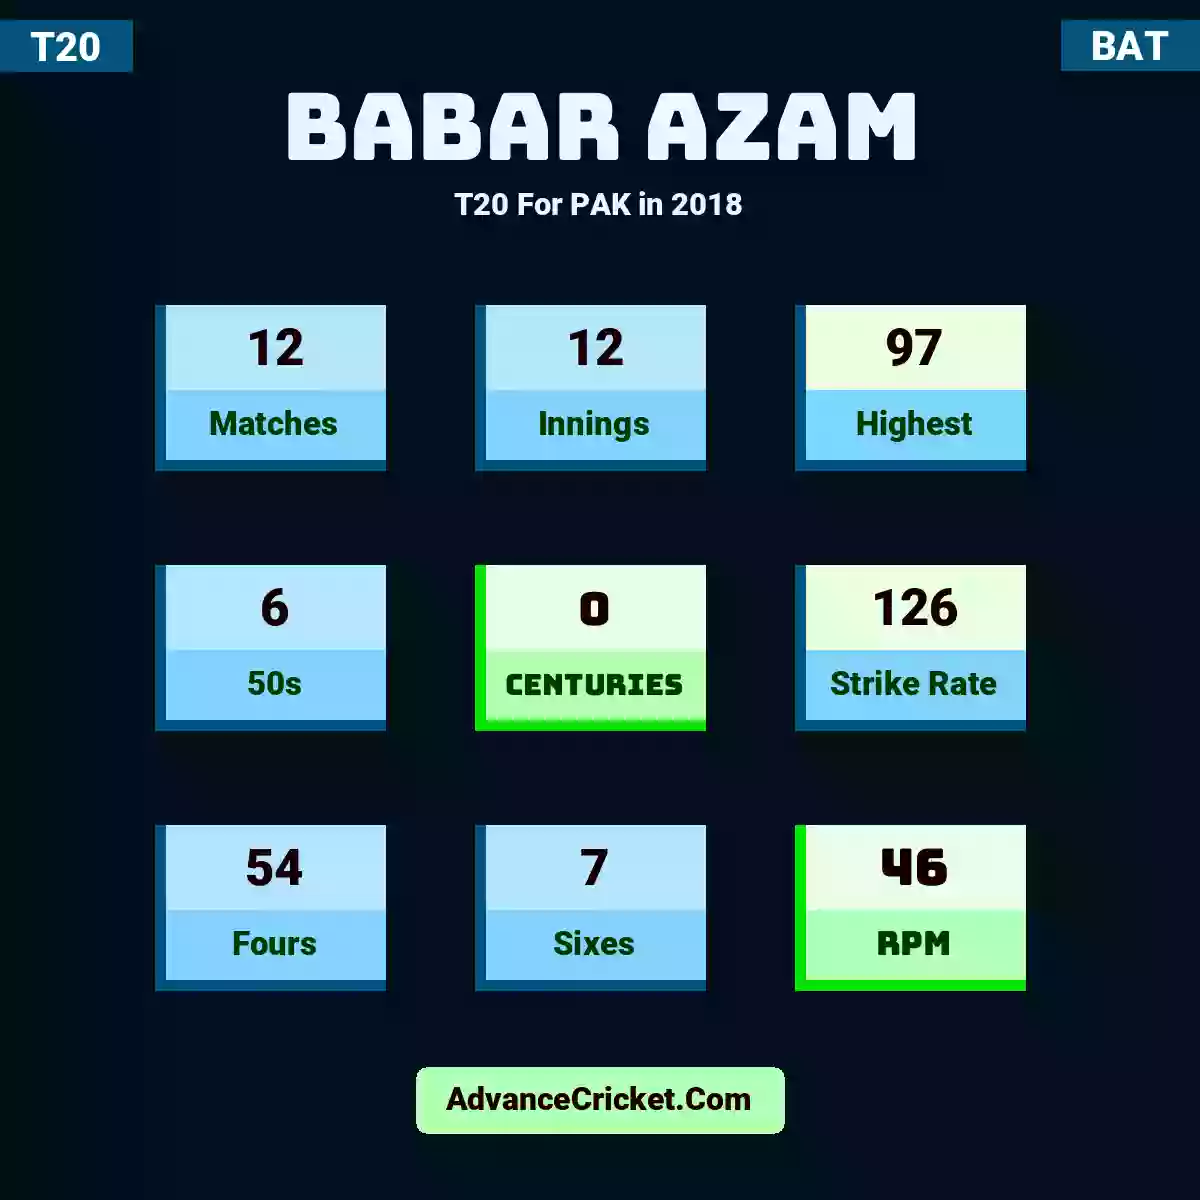 Babar Azam T20  For PAK in 2018, Babar Azam played 12 matches, scored 97 runs as highest, 6 half-centuries, and 0 centuries, with a strike rate of 126. B.Azam hit 54 fours and 7 sixes, with an RPM of 46.